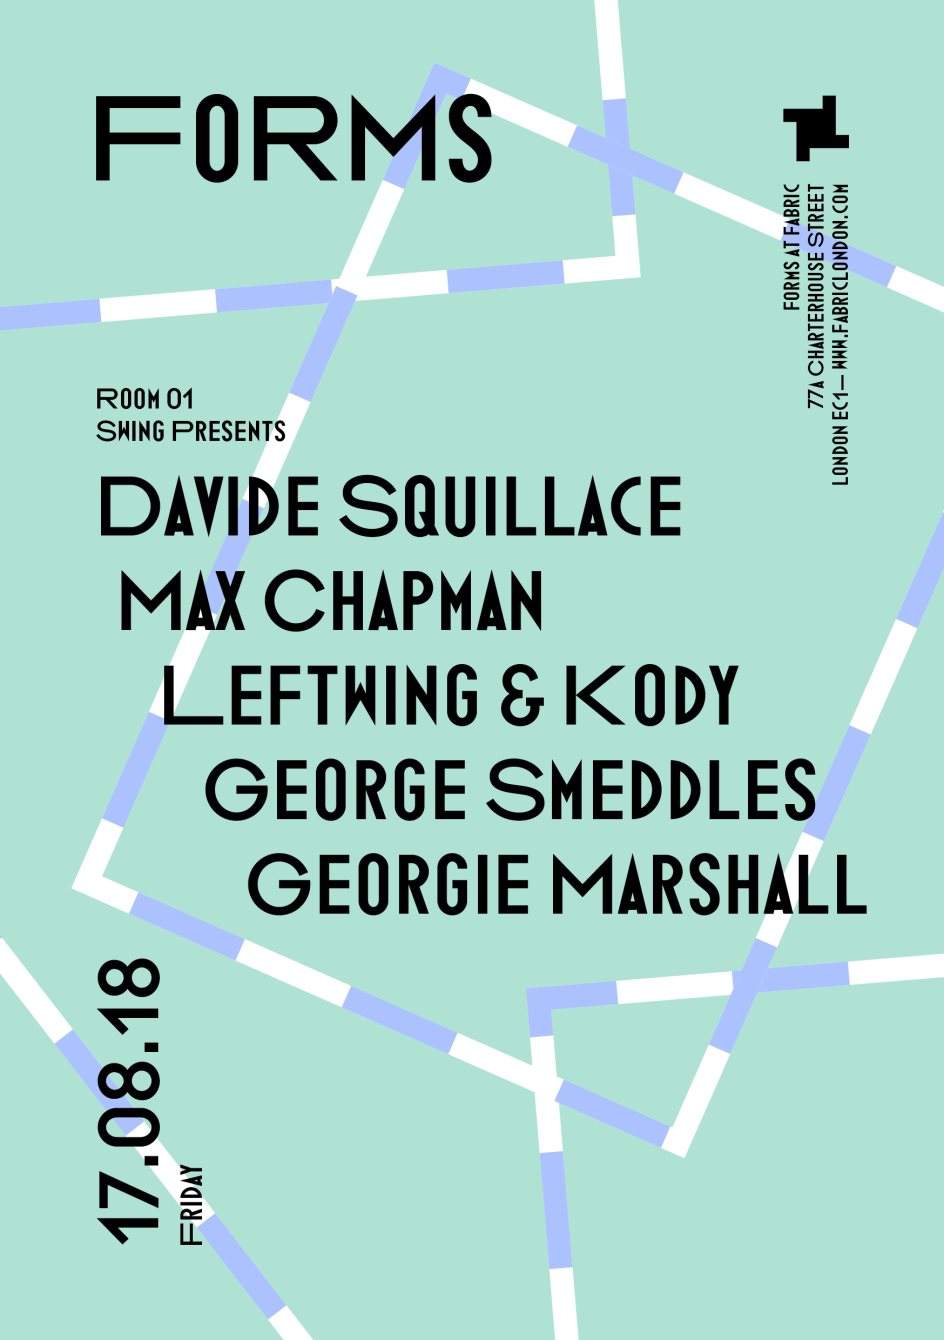 Forms: Swing presents with Davide Squillace, Max Chapman, Leftwing & Kody - Página trasera